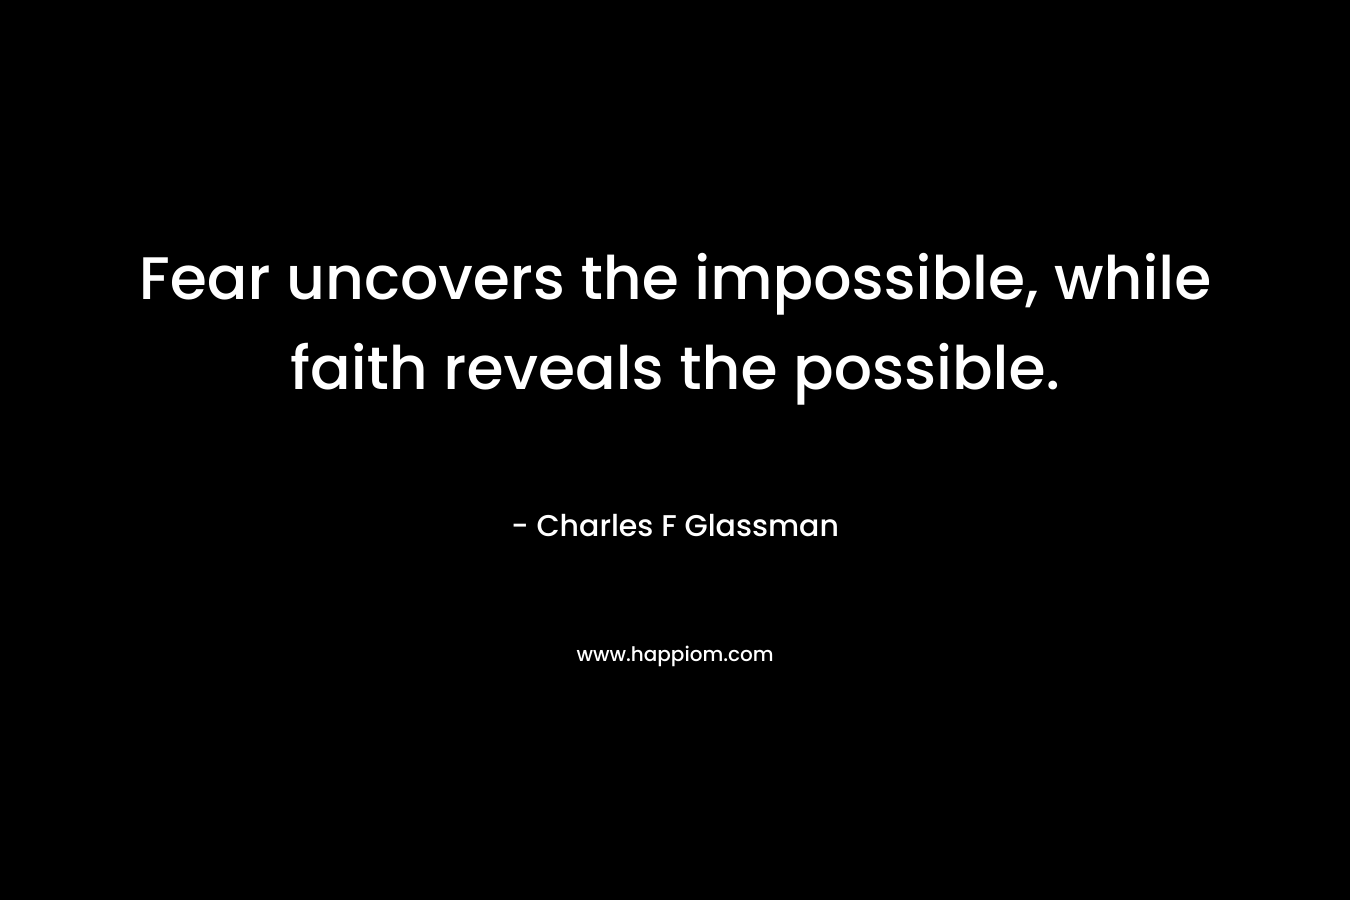 Fear uncovers the impossible, while faith reveals the possible.